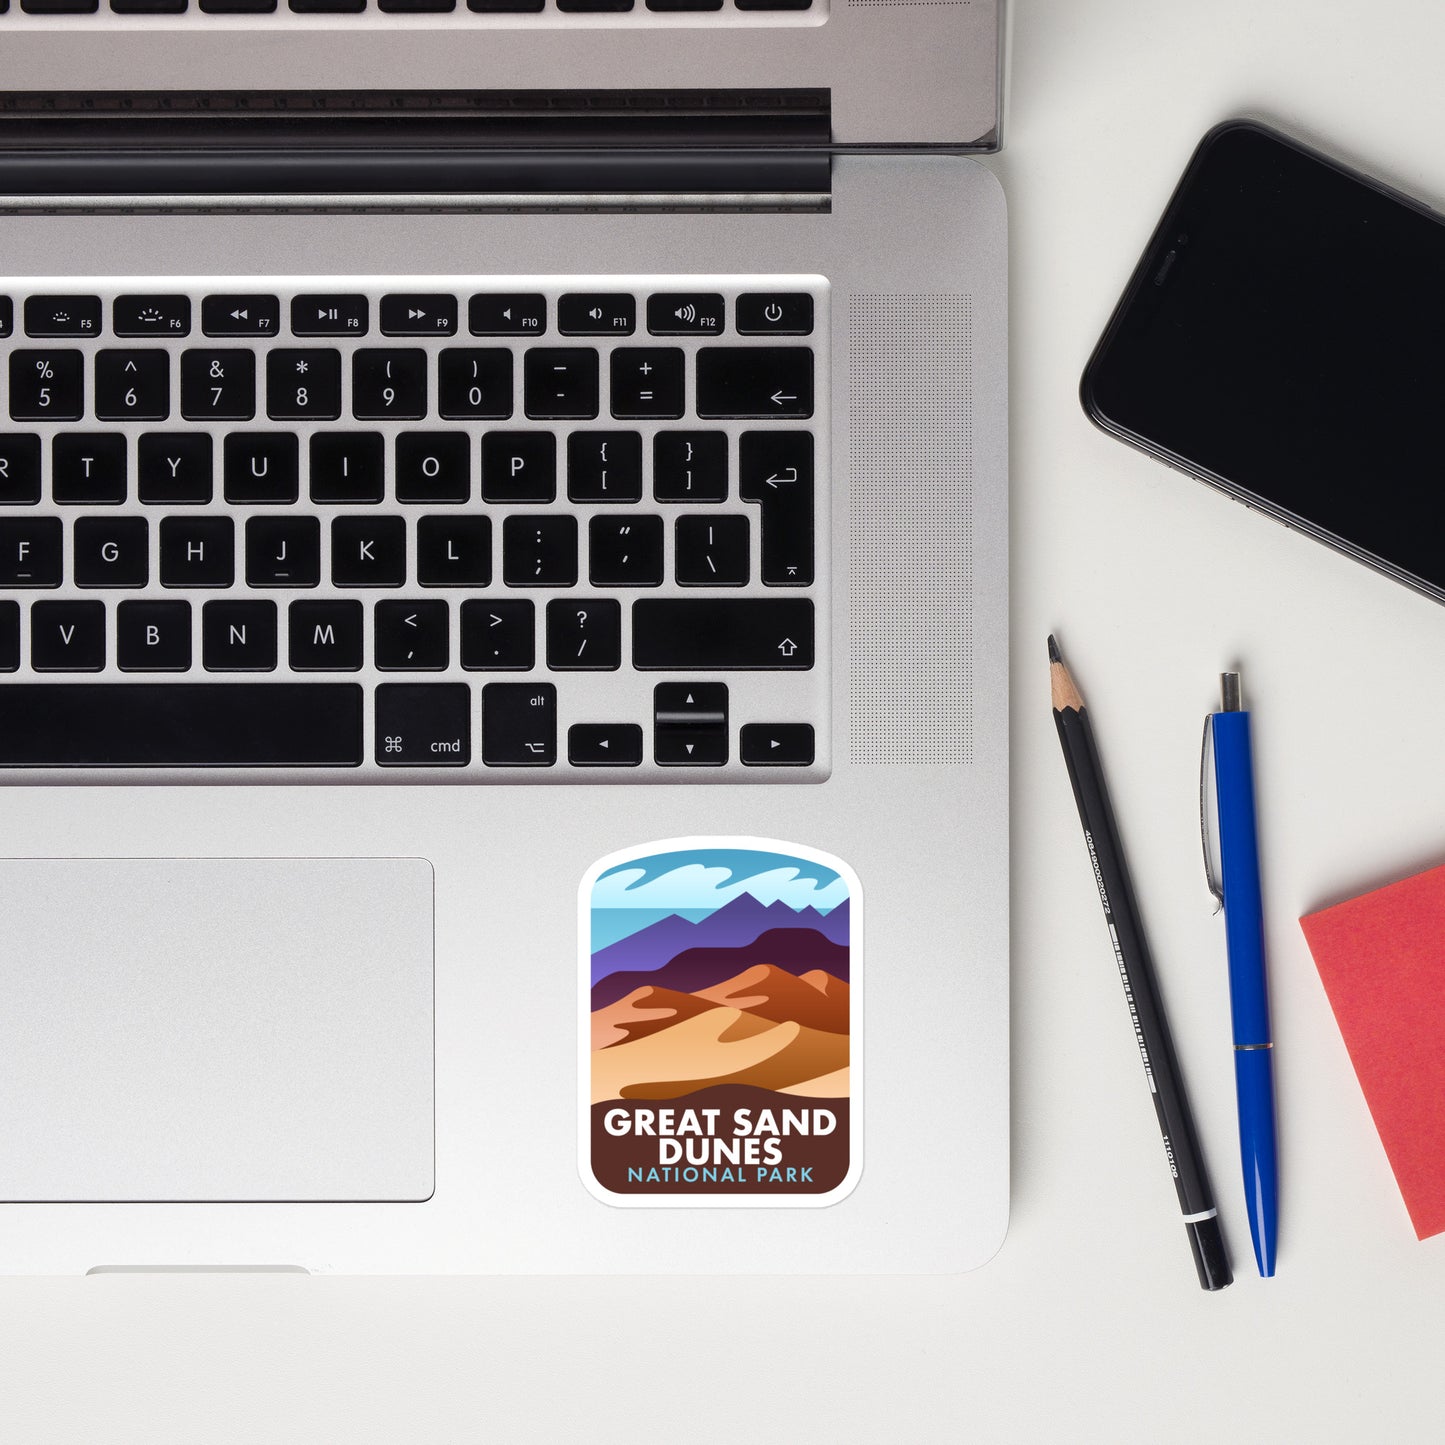 A sticker of Great Sand Dunes National Park on a laptop